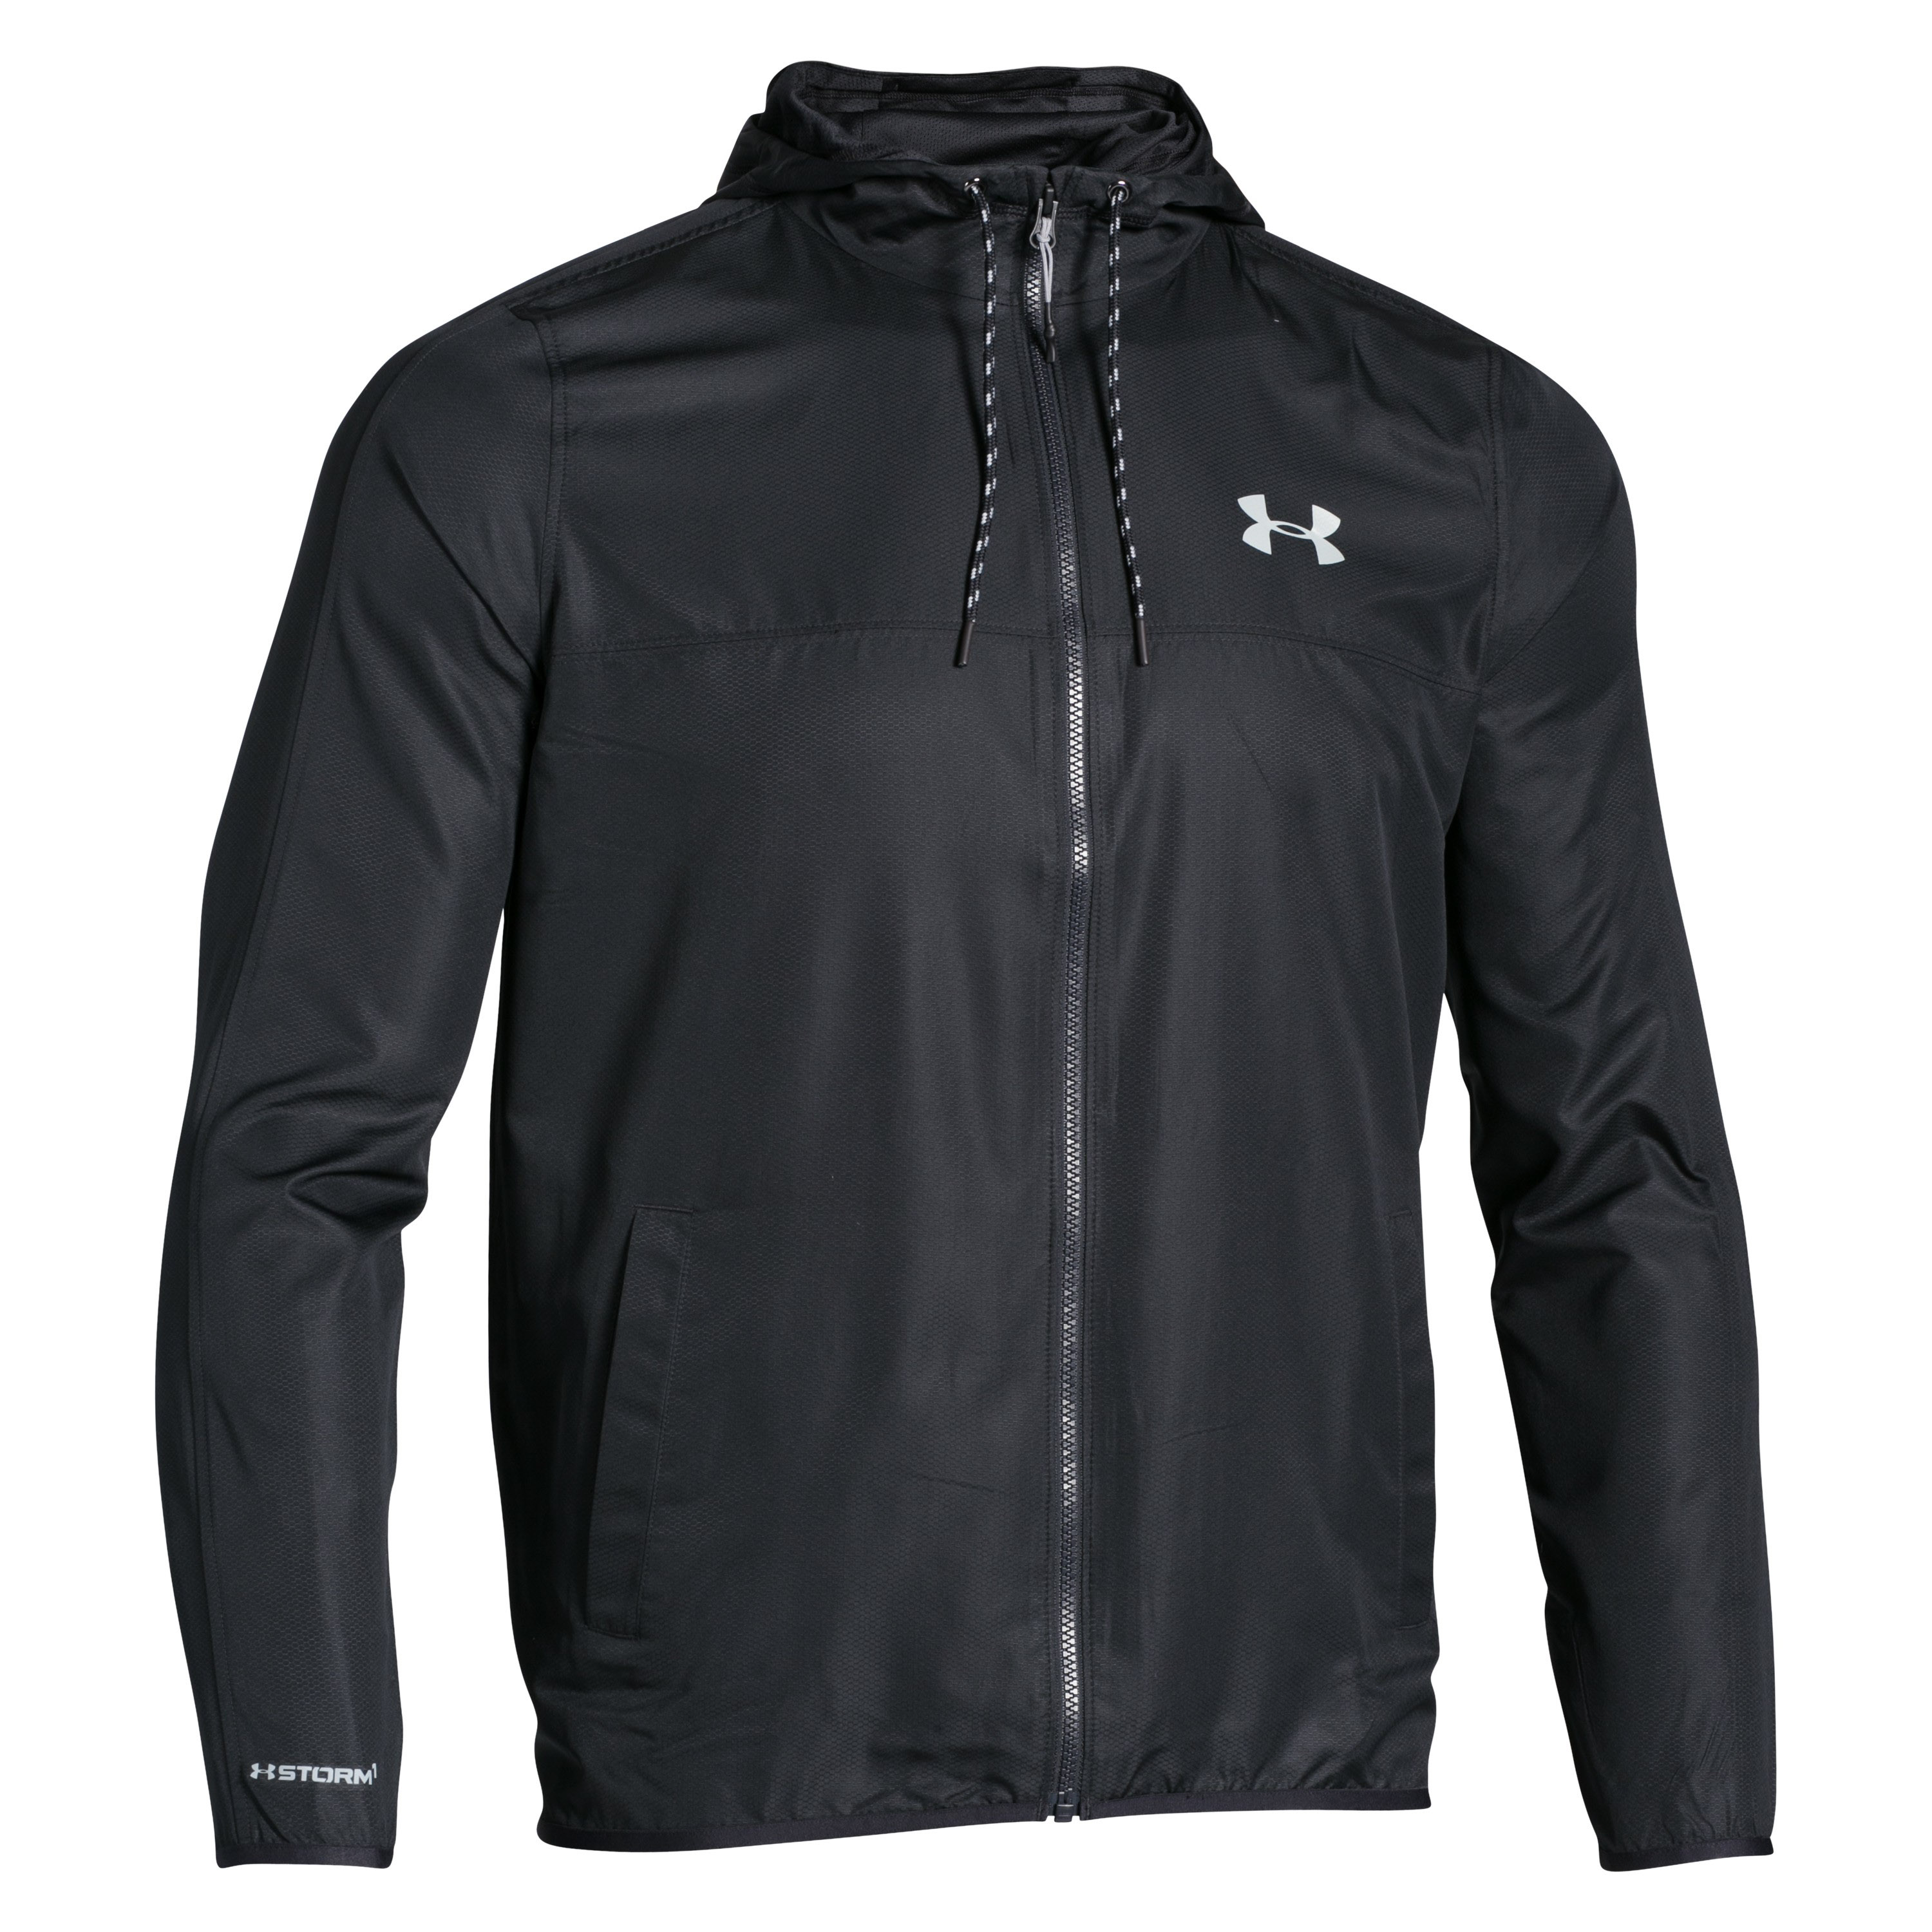 Under armor jackets on sale